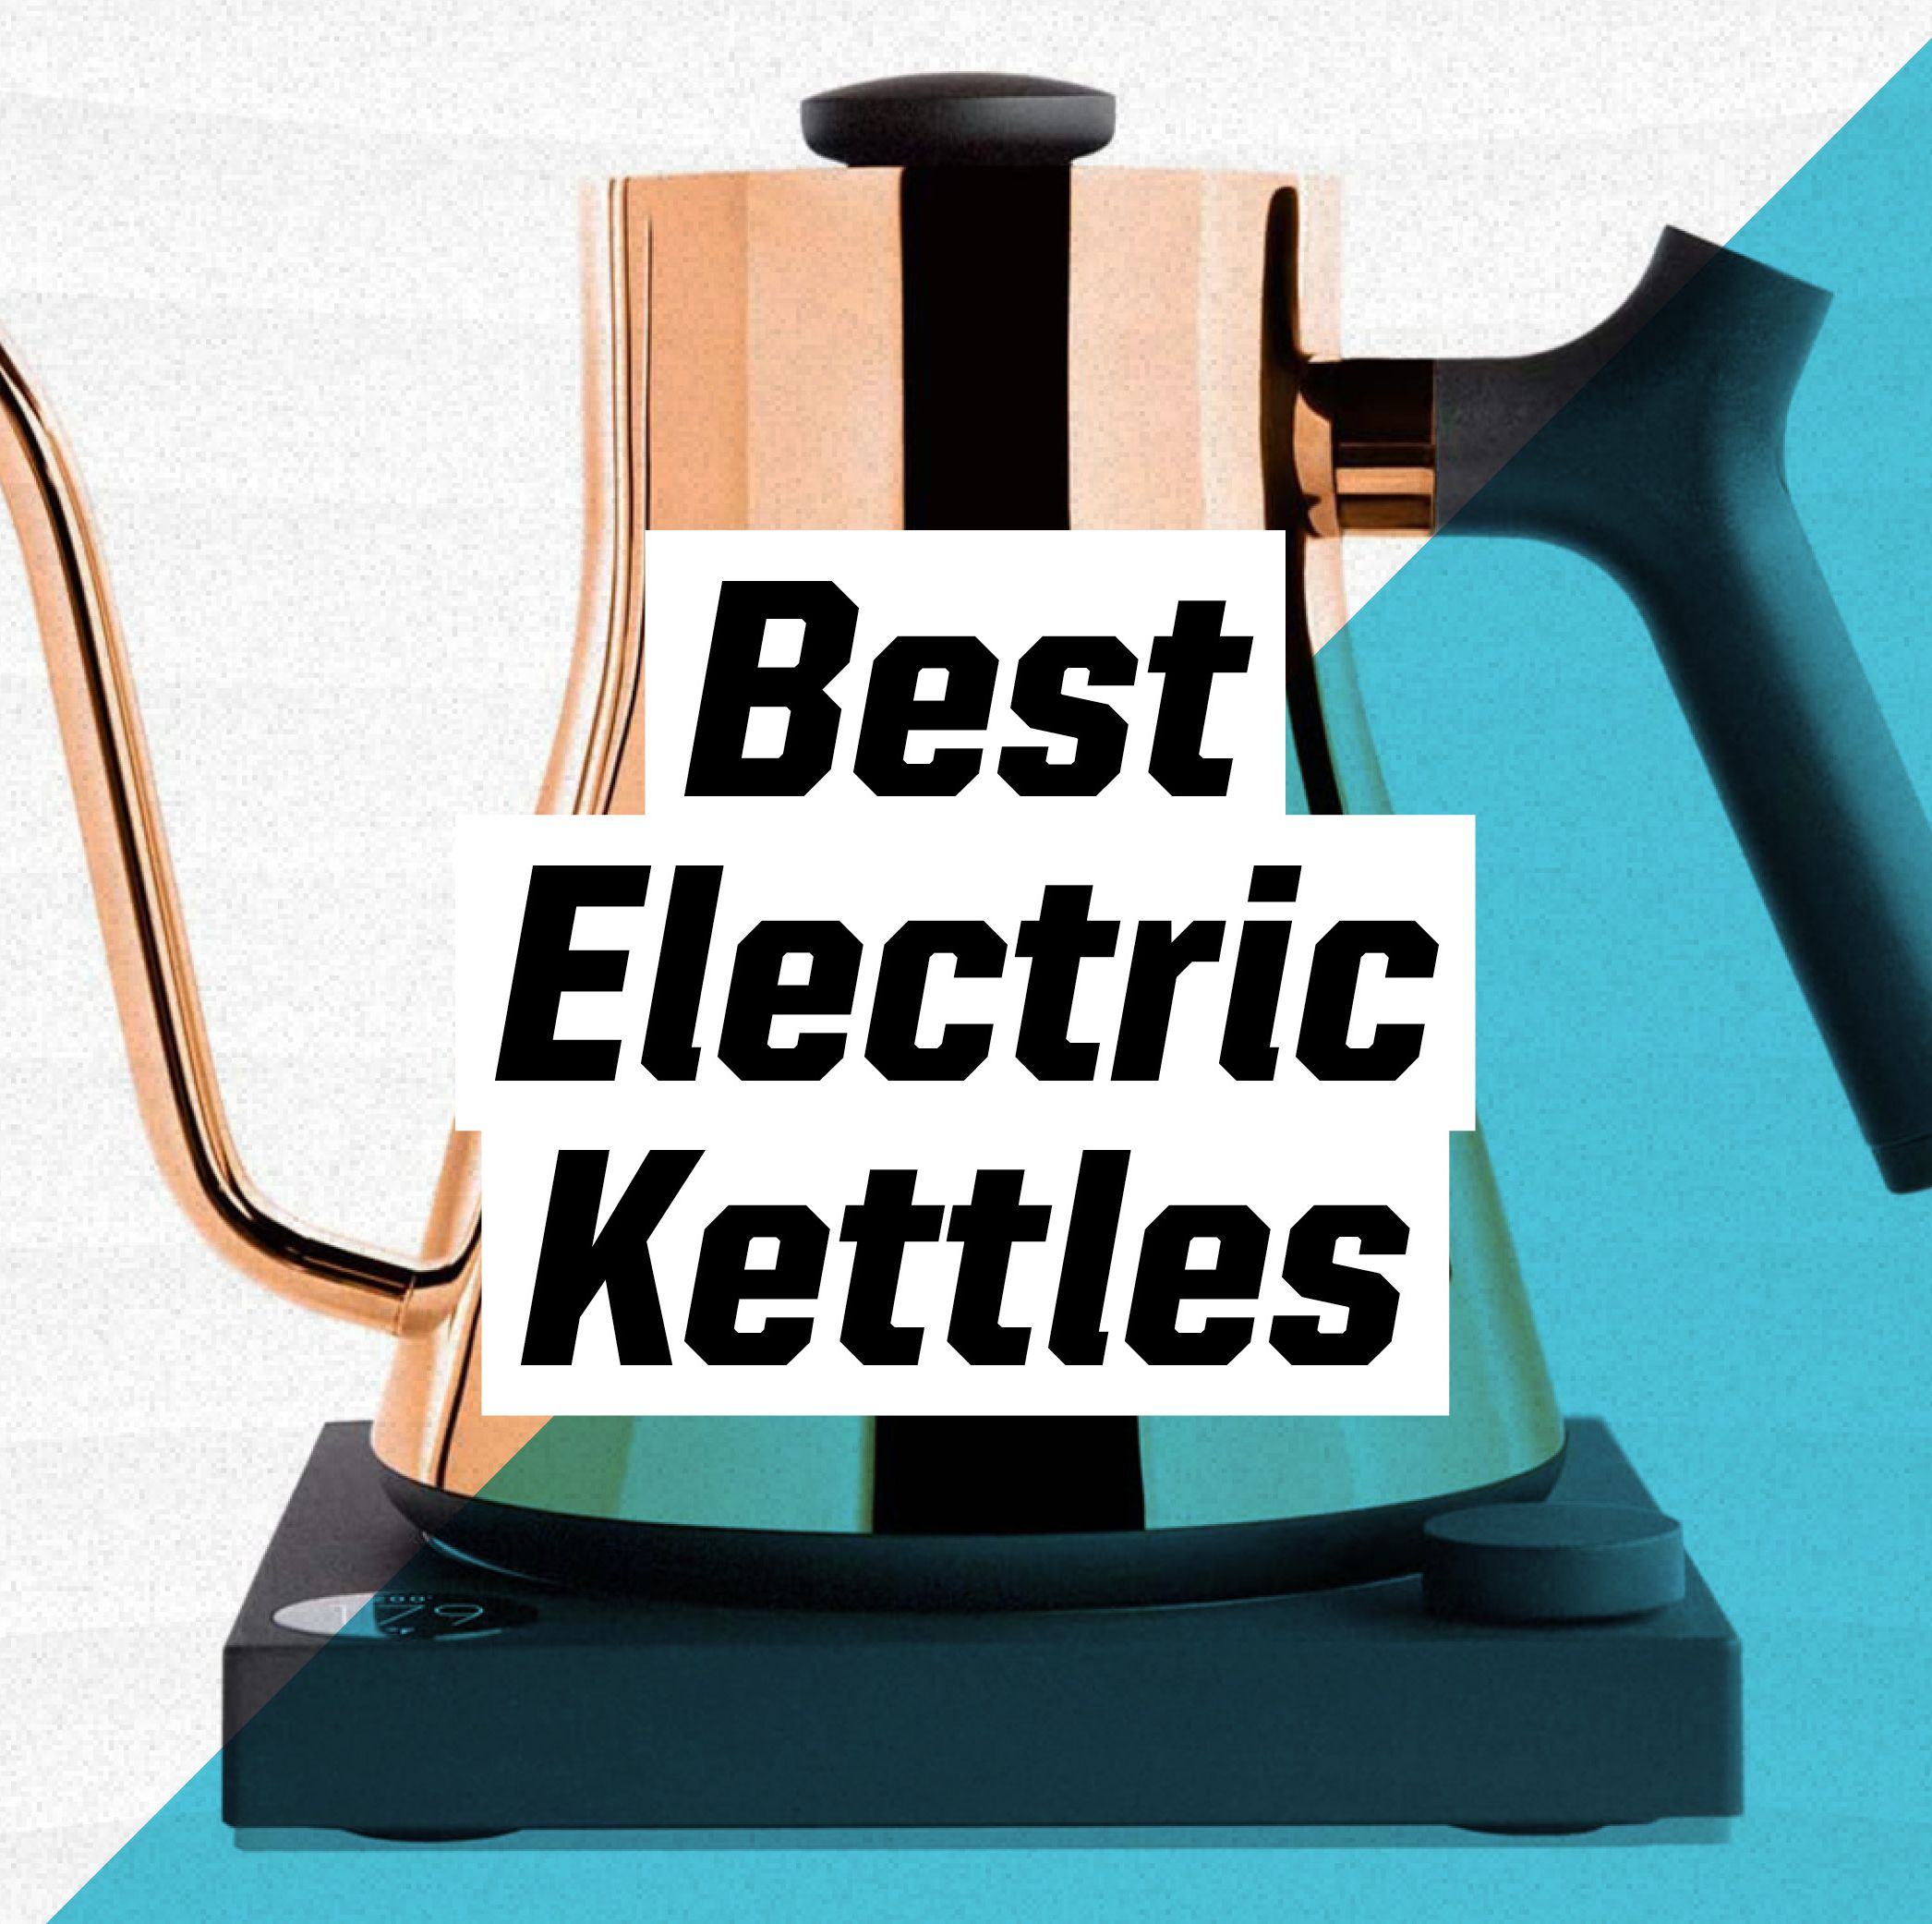 The 10 Best Electric Kettles For the Perfect Cup of Tea or Coffee